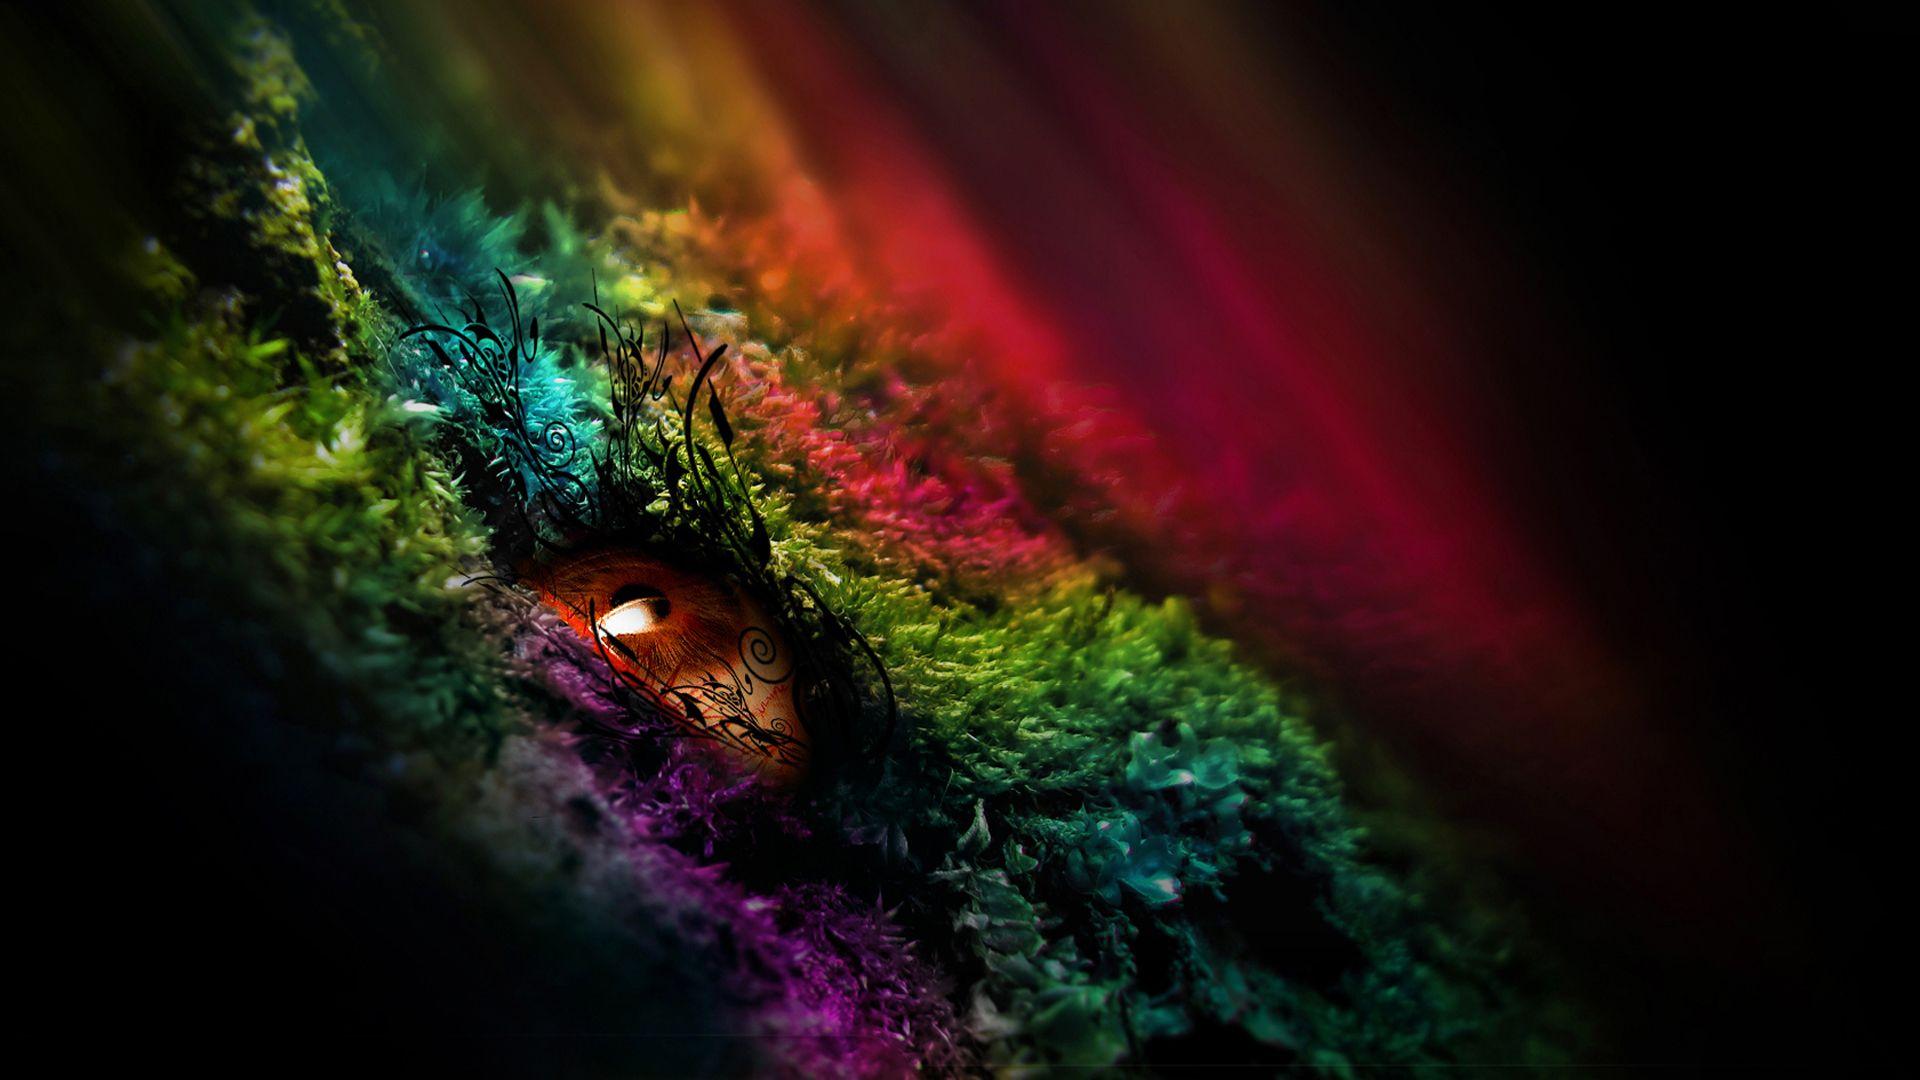 Download the Color Growth Eye Wallpaper, Color Growth Eye iPhone